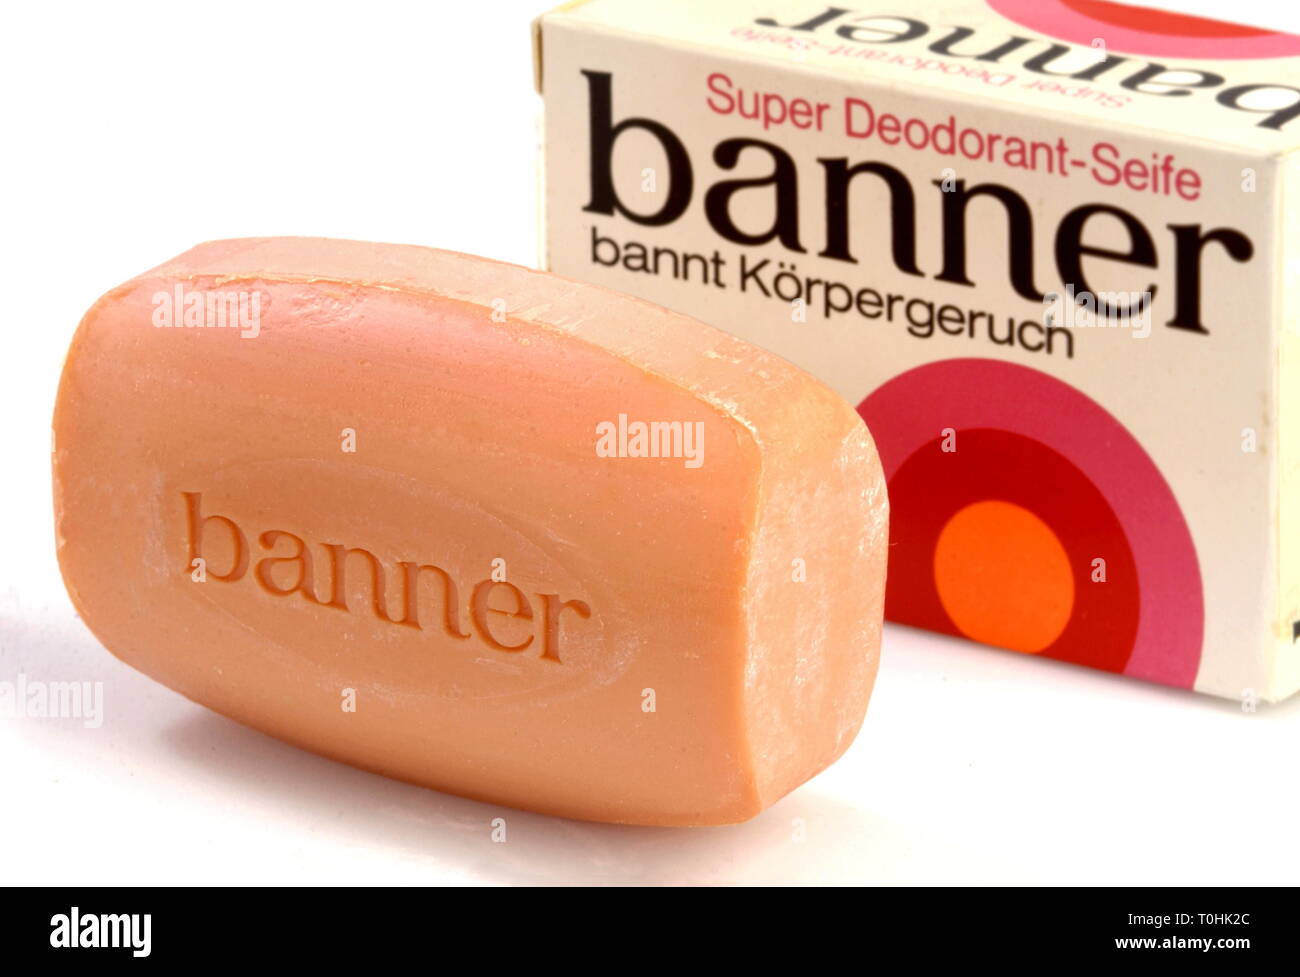 cosmetics, soap, banner, deo, soap, advertising slogan, 'Banner bannt Koerpergeruch' (Banner bans body odor), Germany, 1970s, Additional-Rights-Clearance-Info-Not-Available Stock Photo